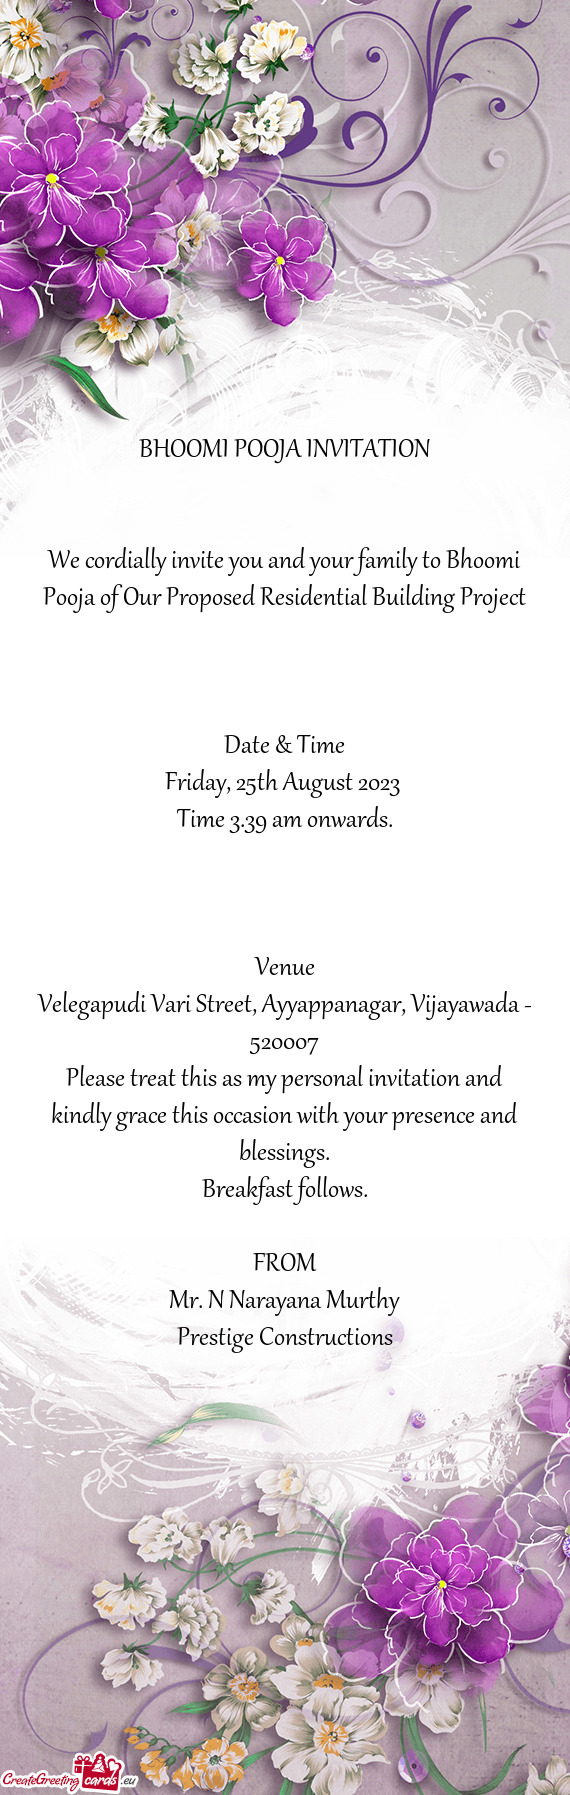 We cordially invite you and your family to Bhoomi Pooja of Our Proposed Residential Building Project